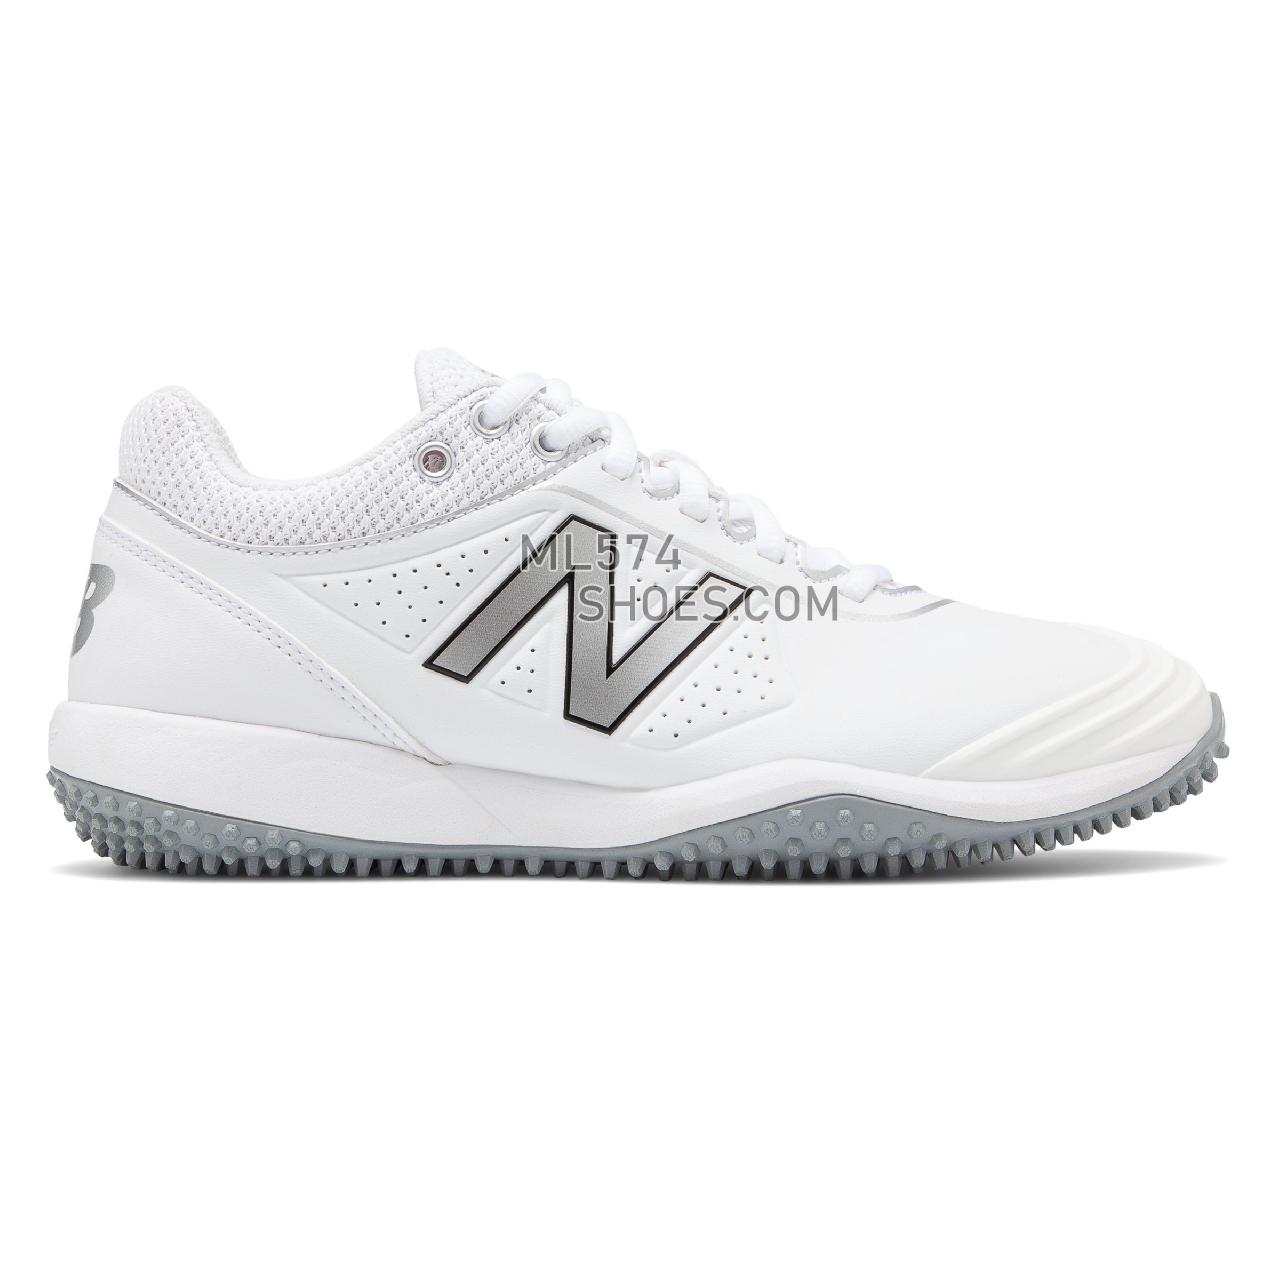 New Balance Fusev2 Turf - Women's Softball - White with Silver - STFUSEW2